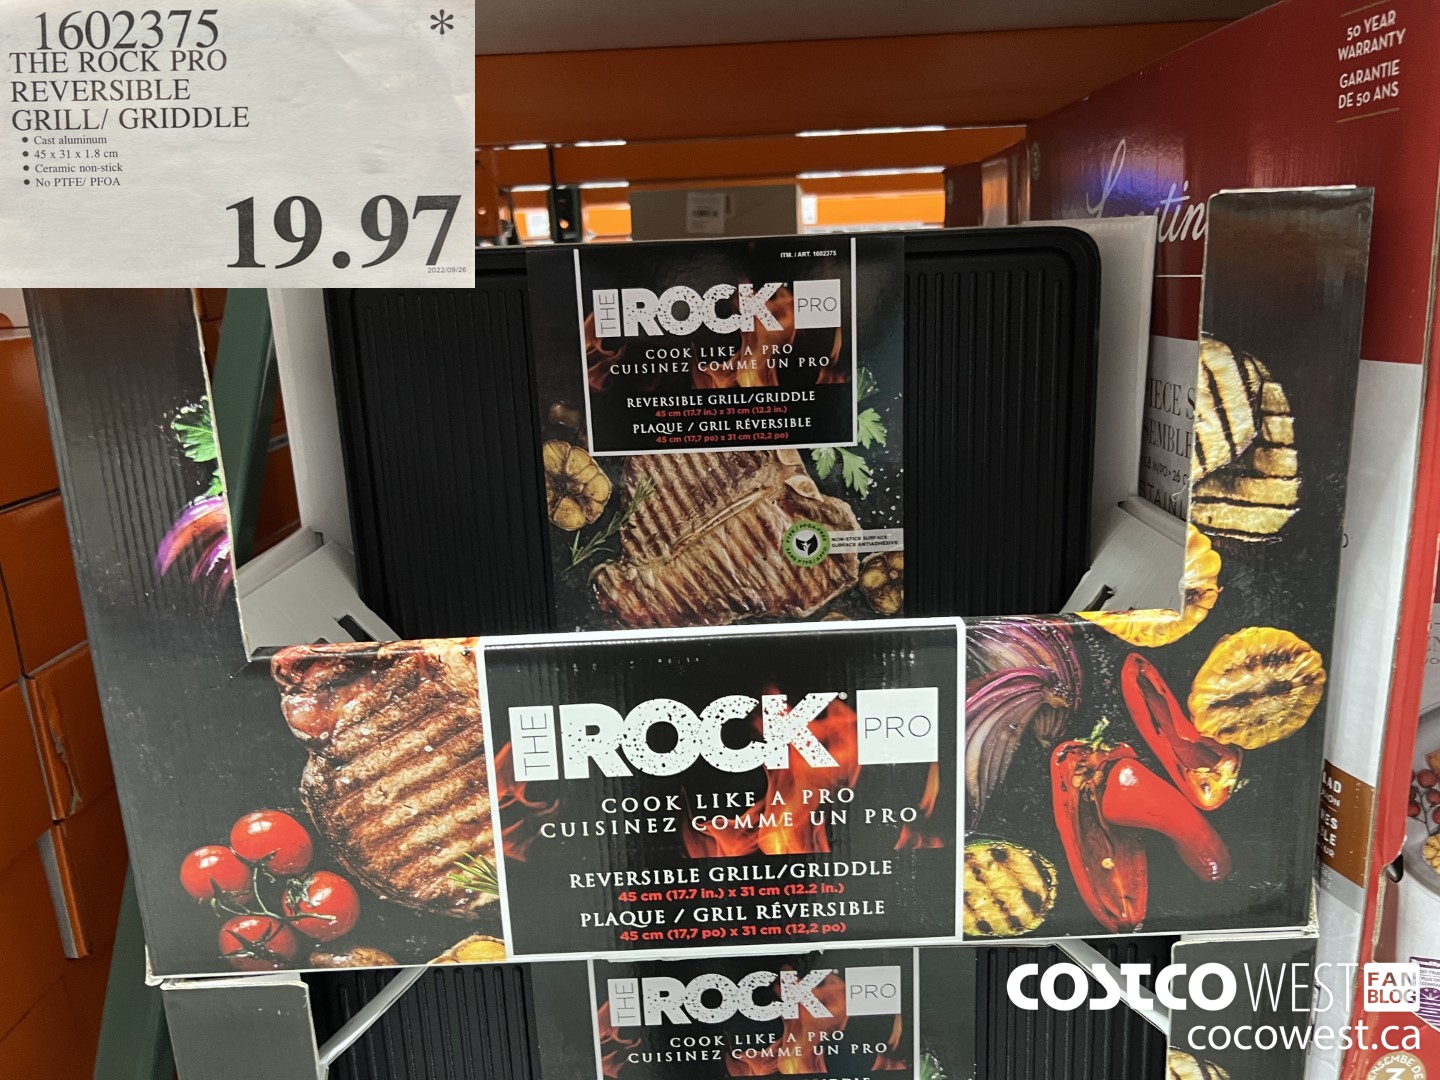 https://west.cocowest1.ca/2022/10/THE_ROCK_PRO_REVERSIBLE_GRILL_GRIDDLE_20221021_103960.jpg